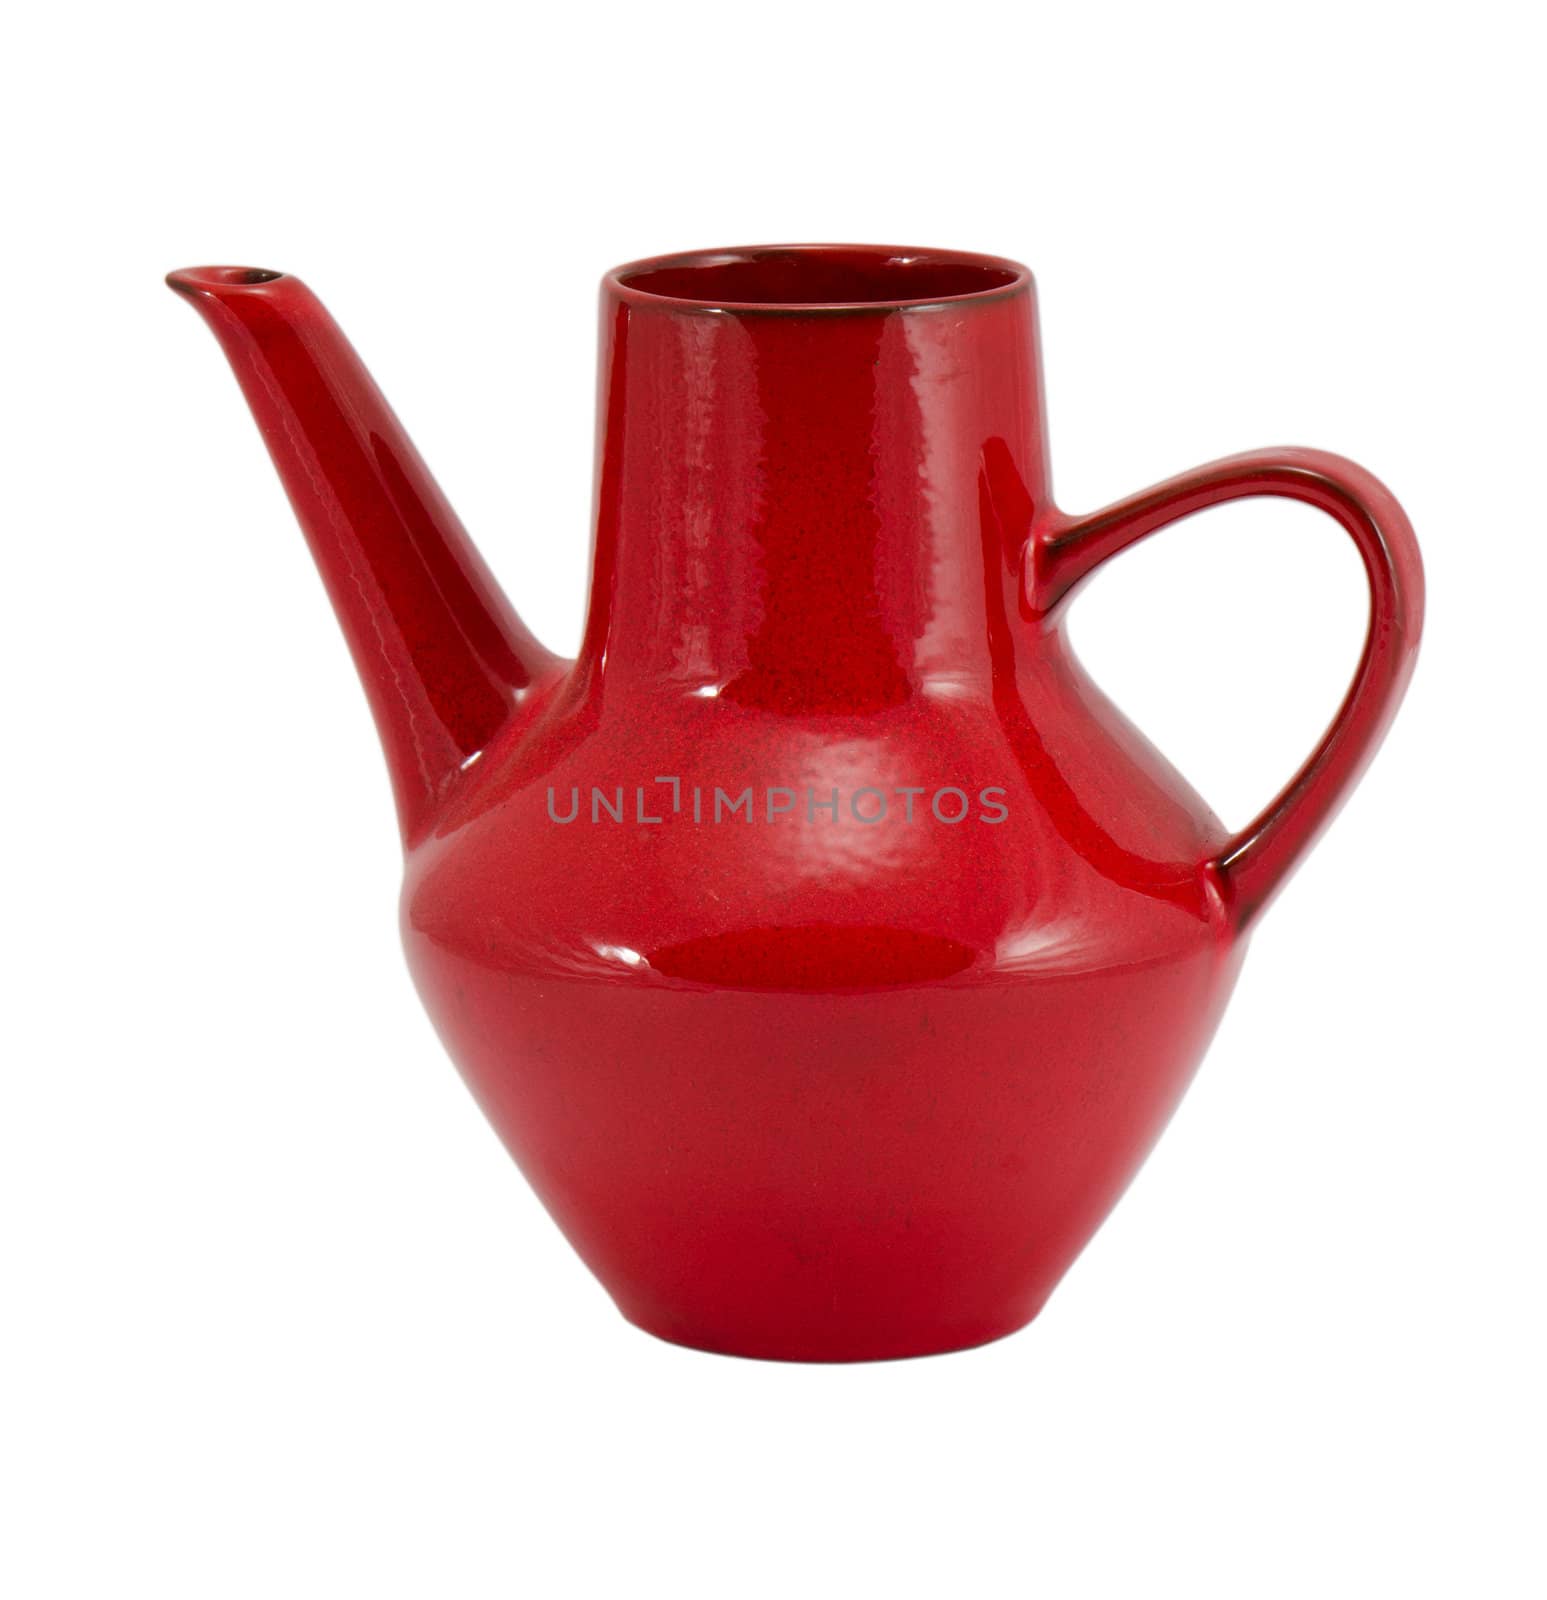 old retro ceramic clay red jug pitcher jar blackjack growler teapot with handle isolated on white background.